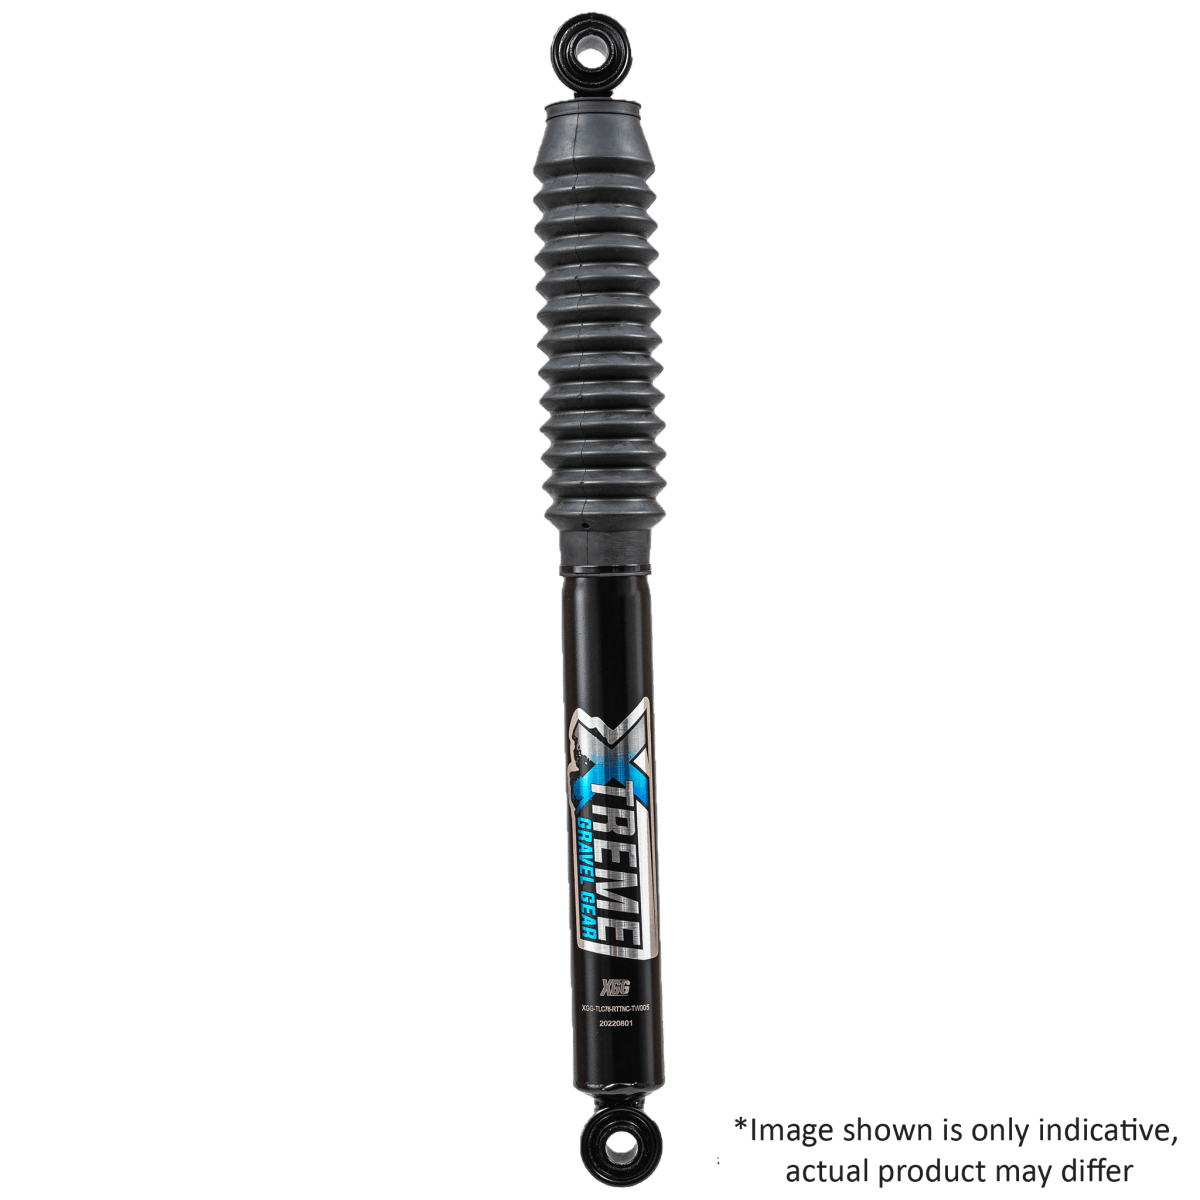 XGG Mountain Series REAR Shocks Nitro to suit a Toyota Fortuner - NZ Offroader